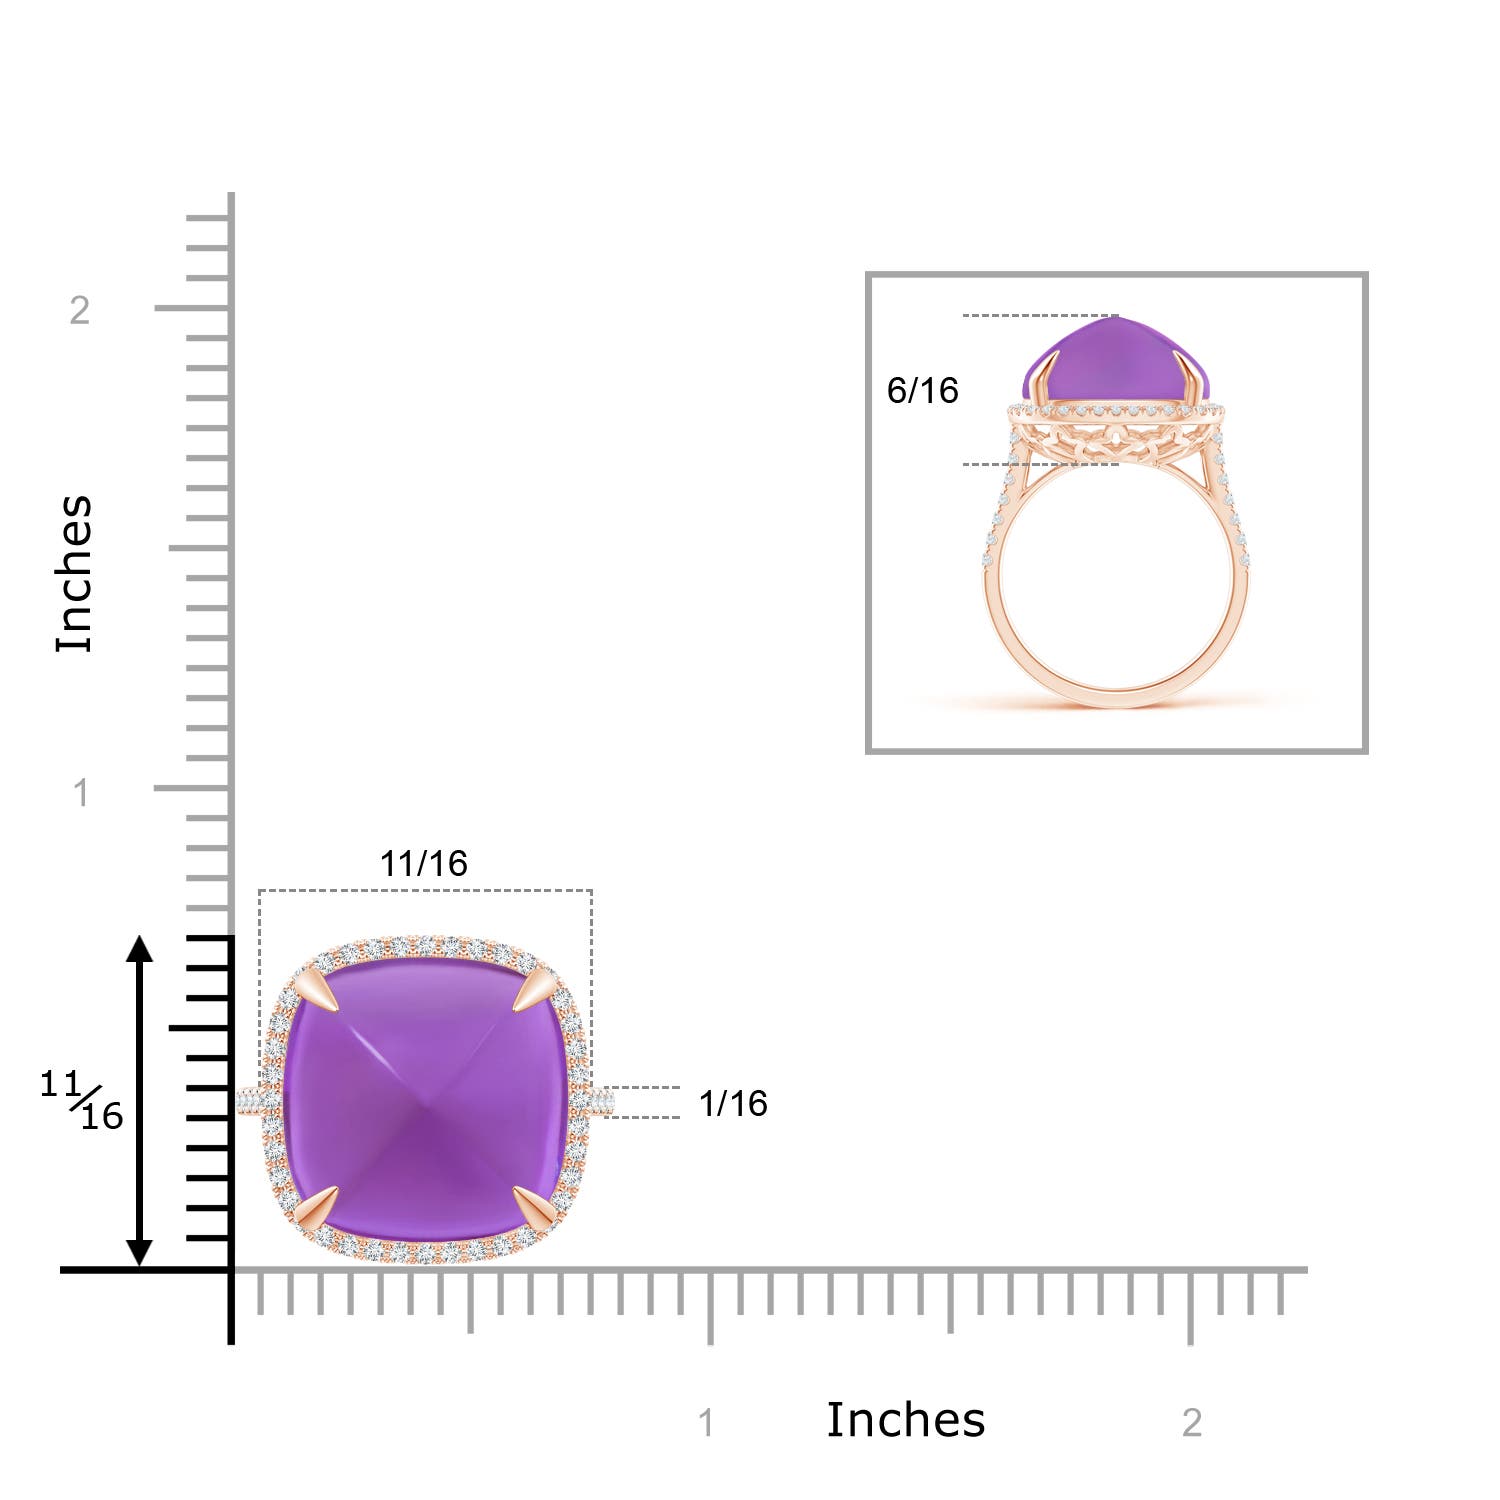 AAA - Amethyst / 16.02 CT / 14 KT Rose Gold